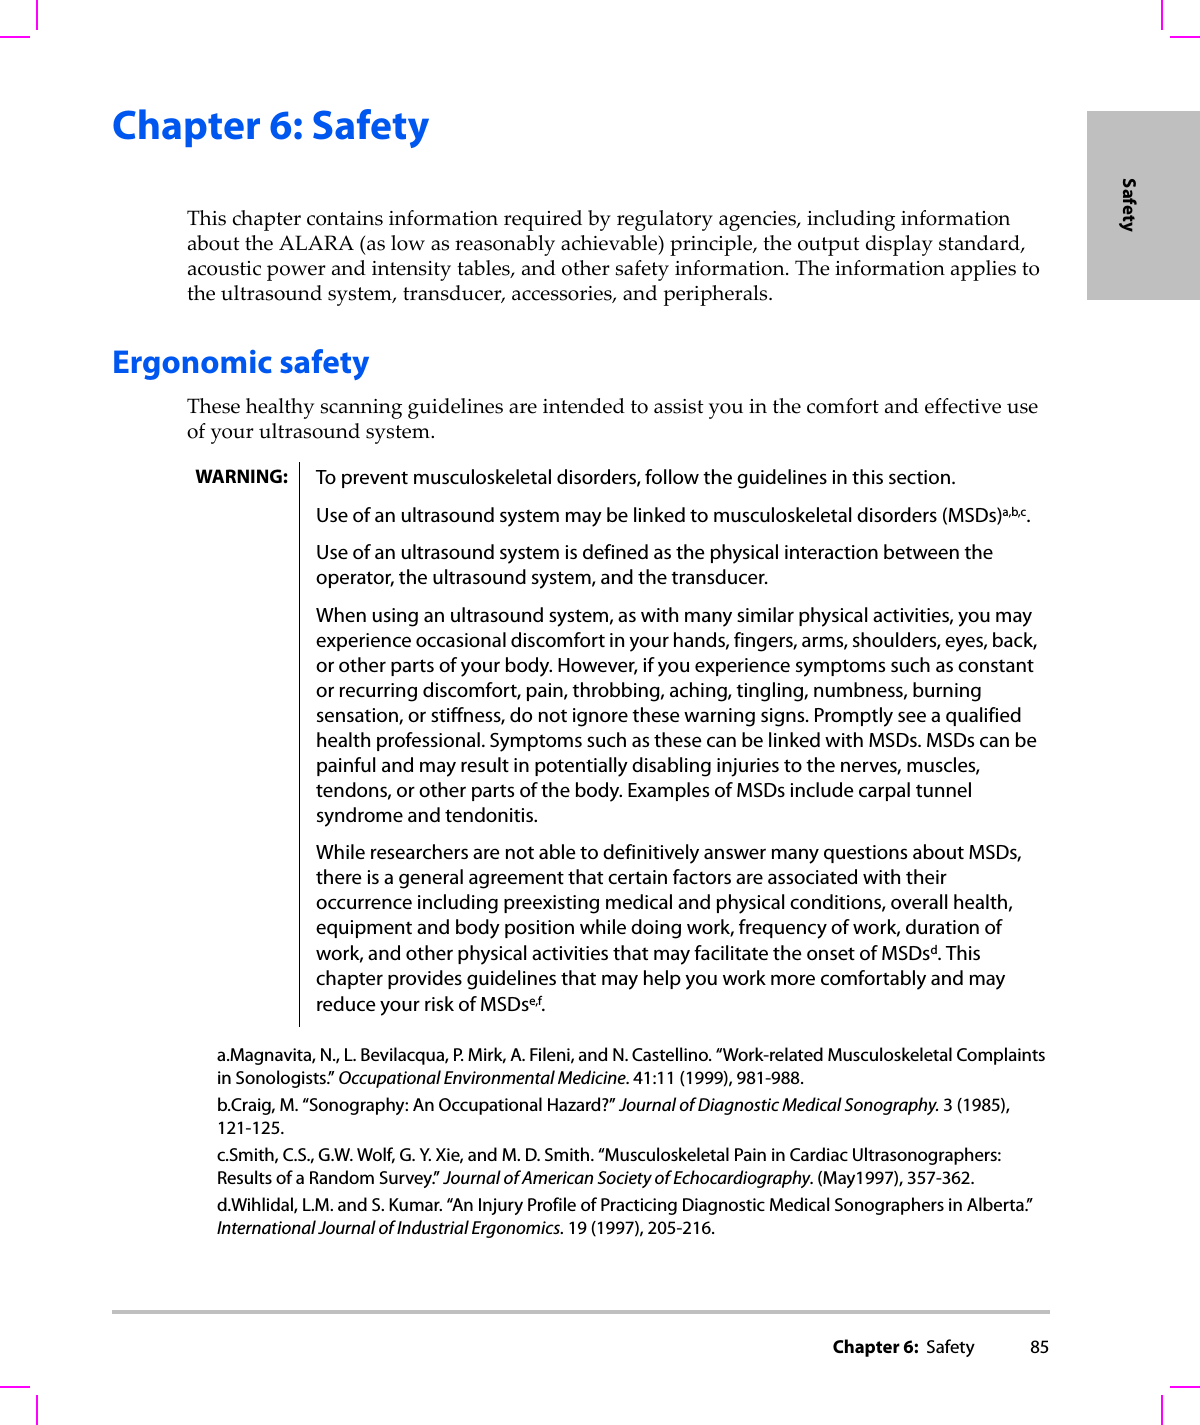 Chapter 6:  Safety 85SafetyChapter 6: SafetyThischaptercontainsinformationrequiredbyregulatoryagencies,includinginformationabouttheALARA(aslowasreasonablyachievable)principle,theoutputdisplaystandard,acousticpowerandintensitytables,andothersafetyinformation.Theinformationappliestotheultrasoundsystem,transducer,accessories,andperipherals.Ergonomic safetyThesehealthyscanningguidelinesareintendedtoassistyouinthecomfortandeffectiveuseofyourultrasoundsystem.WARNING: To prevent musculoskeletal disorders, follow the guidelines in this section.Use of an ultrasound system may be linked to musculoskeletal disorders (MSDs)a,b,c.Use of an ultrasound system is defined as the physical interaction between the operator, the ultrasound system, and the transducer.When using an ultrasound system, as with many similar physical activities, you may experience occasional discomfort in your hands, fingers, arms, shoulders, eyes, back, or other parts of your body. However, if you experience symptoms such as constant or recurring discomfort, pain, throbbing, aching, tingling, numbness, burning sensation, or stiffness, do not ignore these warning signs. Promptly see a qualified health professional. Symptoms such as these can be linked with MSDs. MSDs can be painful and may result in potentially disabling injuries to the nerves, muscles, tendons, or other parts of the body. Examples of MSDs include carpal tunnel syndrome and tendonitis.While researchers are not able to definitively answer many questions about MSDs, there is a general agreement that certain factors are associated with their occurrence including preexisting medical and physical conditions, overall health, equipment and body position while doing work, frequency of work, duration of work, and other physical activities that may facilitate the onset of MSDsd. This chapter provides guidelines that may help you work more comfortably and may reduce your risk of MSDse,f.a.Magnavita, N., L. Bevilacqua, P. Mirk, A. Fileni, and N. Castellino. “Work-related Musculoskeletal Complaints in Sonologists.” Occupational Environmental Medicine. 41:11 (1999), 981-988.b.Craig, M. “Sonography: An Occupational Hazard?” Journal of Diagnostic Medical Sonography. 3 (1985), 121-125.c.Smith, C.S., G.W. Wolf, G. Y. Xie, and M. D. Smith. “Musculoskeletal Pain in Cardiac Ultrasonographers: Results of a Random Survey.” Journal of American Society of Echocardiography. (May1997), 357-362.d.Wihlidal, L.M. and S. Kumar. “An Injury Profile of Practicing Diagnostic Medical Sonographers in Alberta.” International Journal of Industrial Ergonomics. 19 (1997), 205-216.